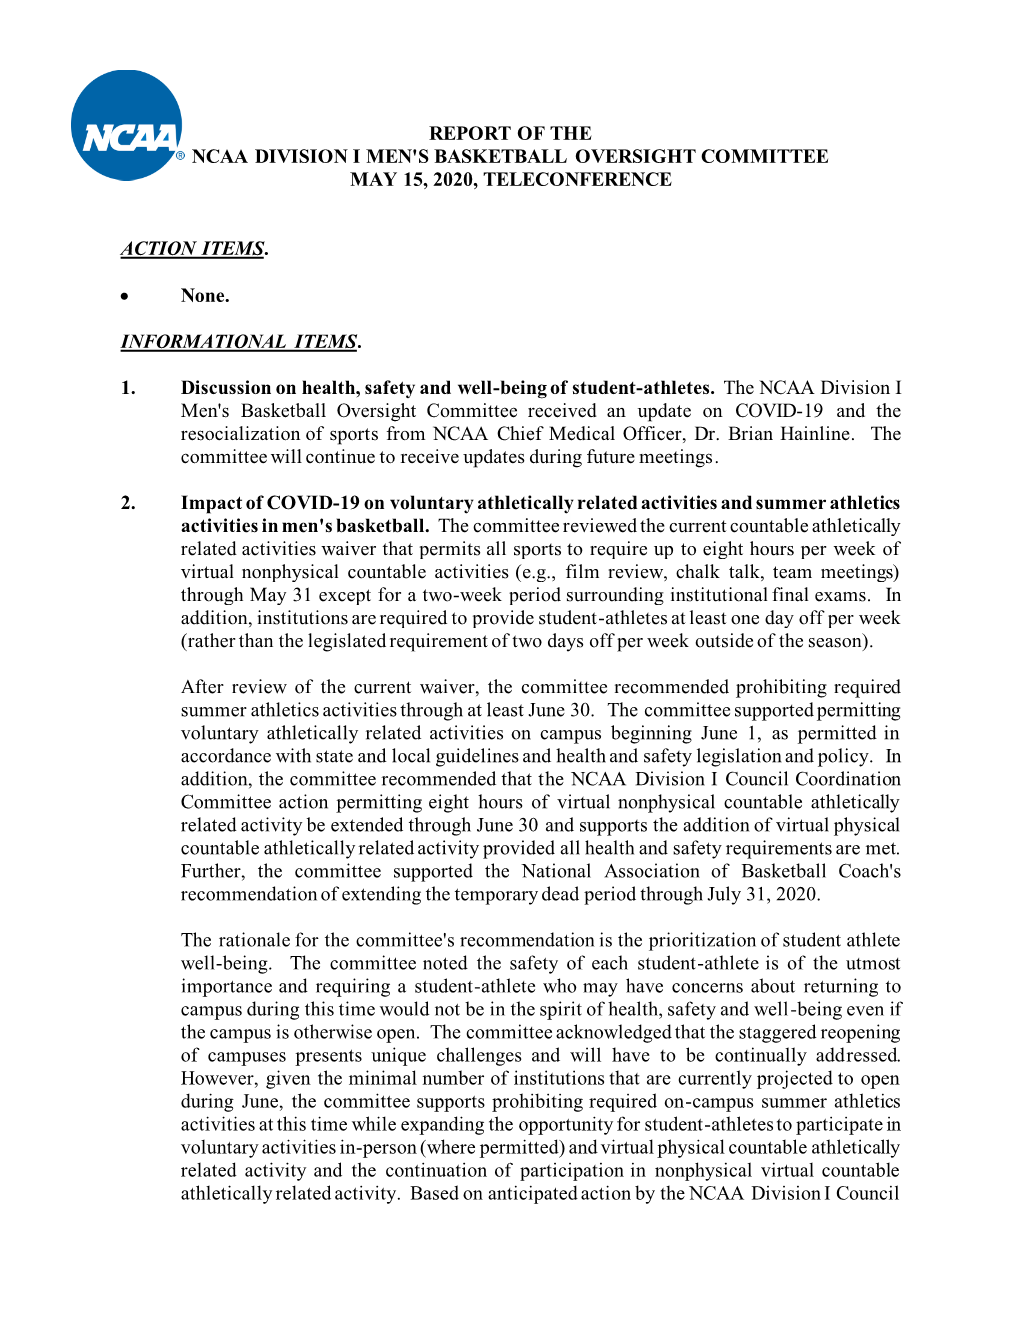 Report of the Ncaa Division I Men's Basketball Oversight Committee May 15, 2020, Teleconference